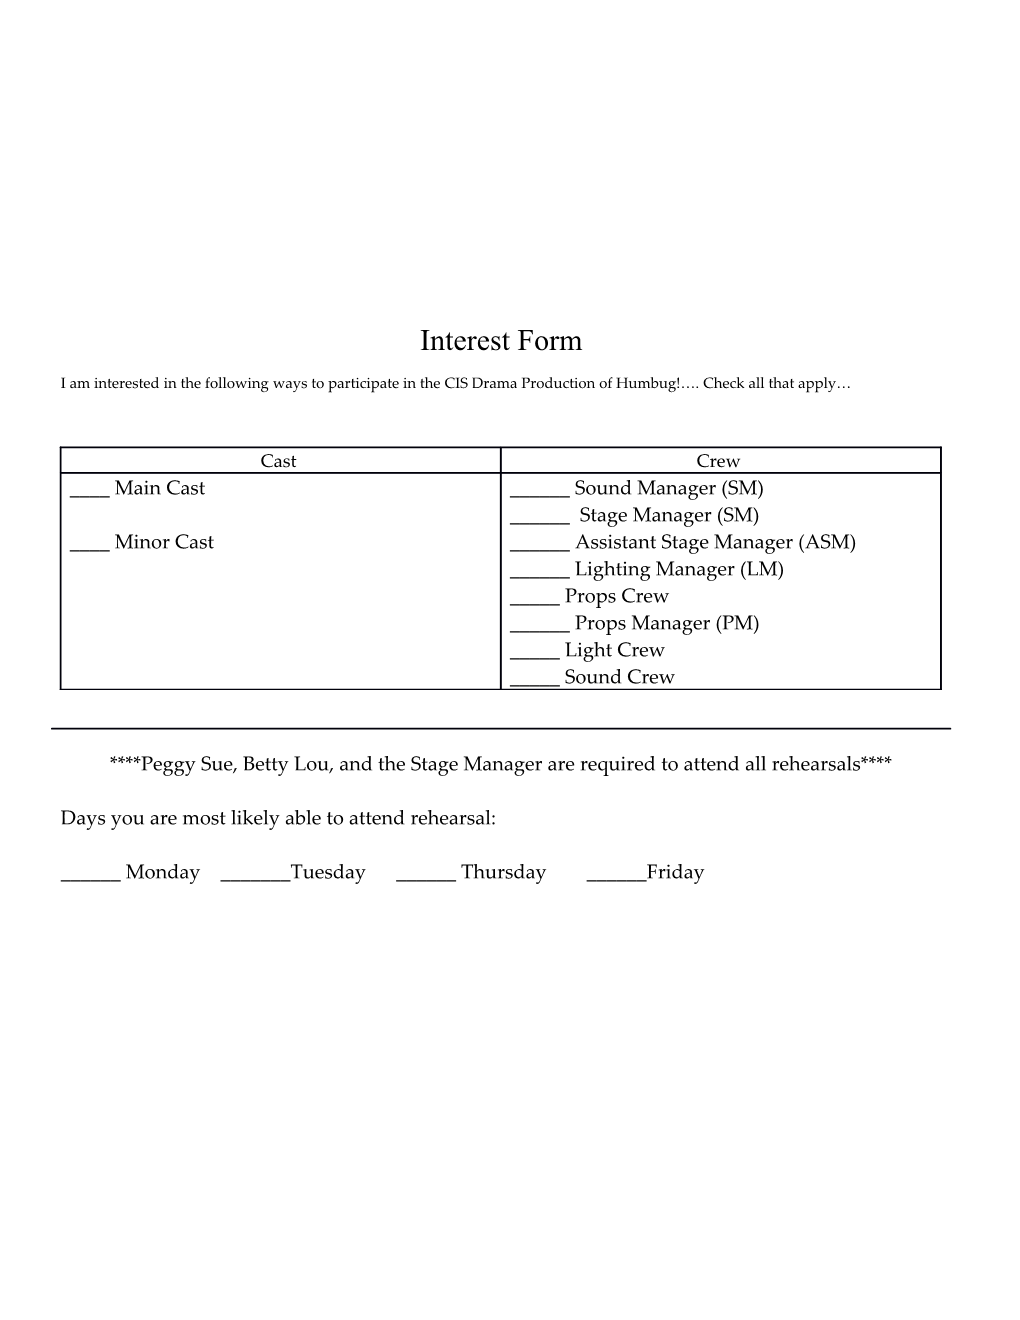 Hot Rod Rehearsal Schedule and Interest Form